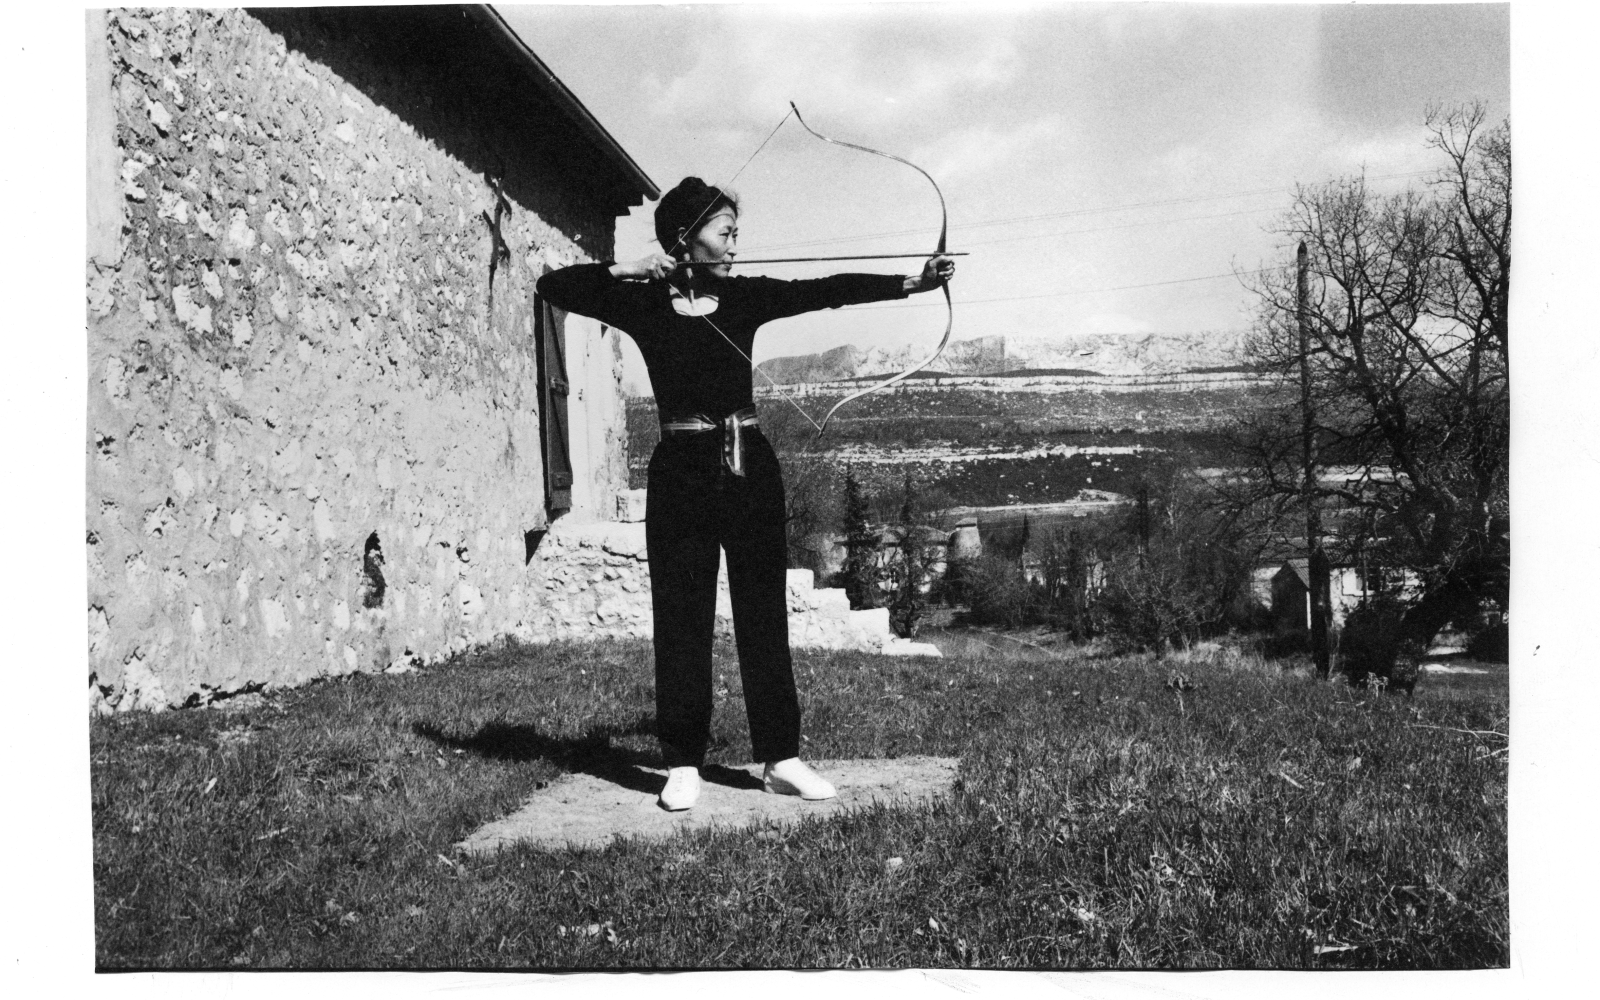 Soun-Gui Kim with Bow and Arrow, black and white